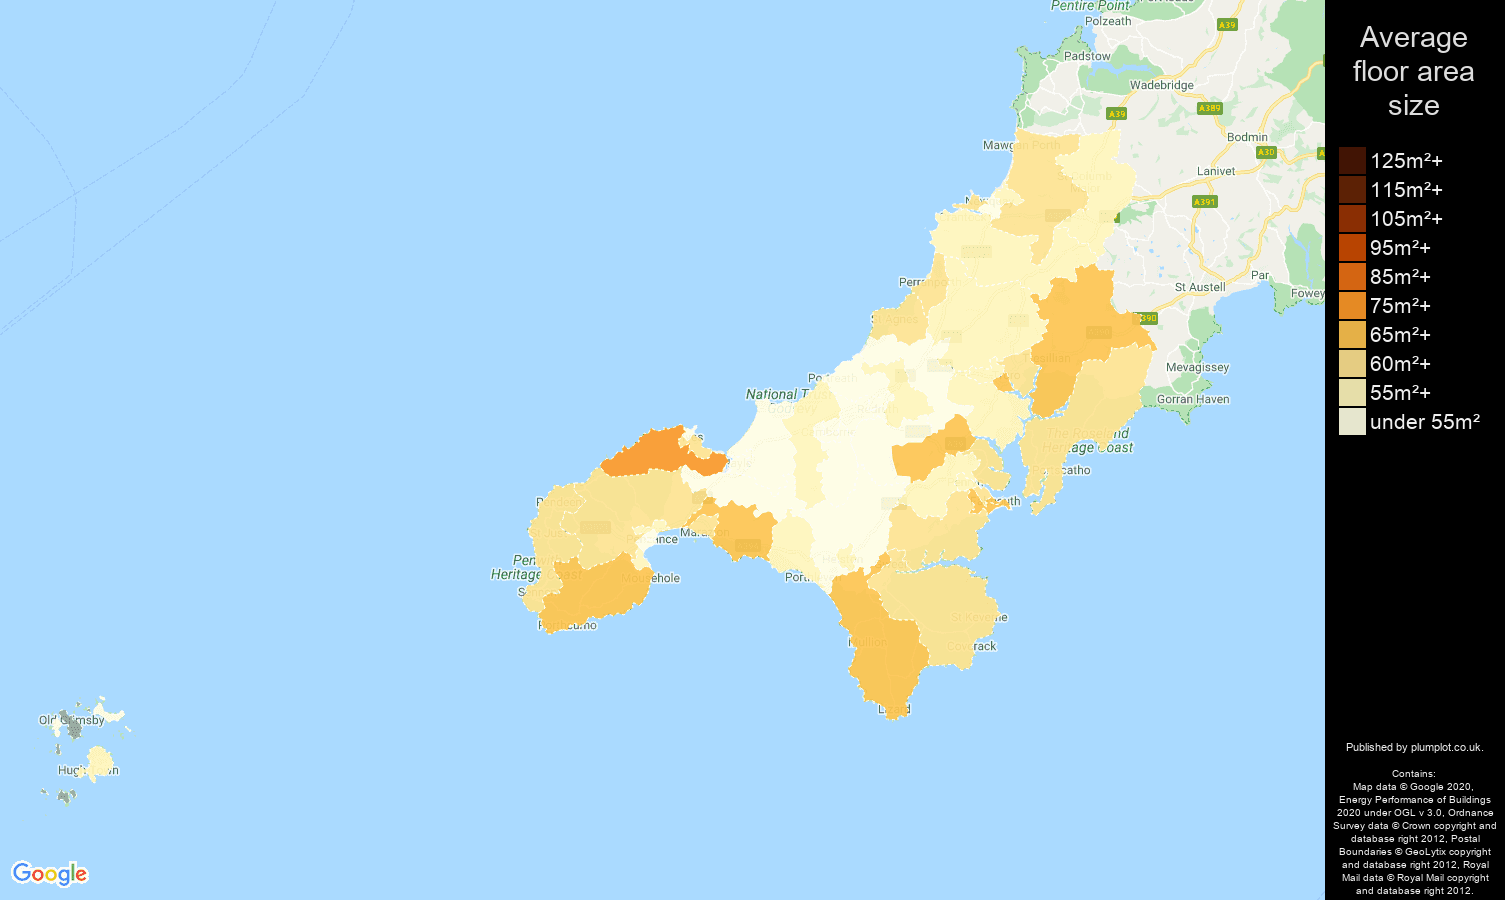 Truro map of average floor area size of flats